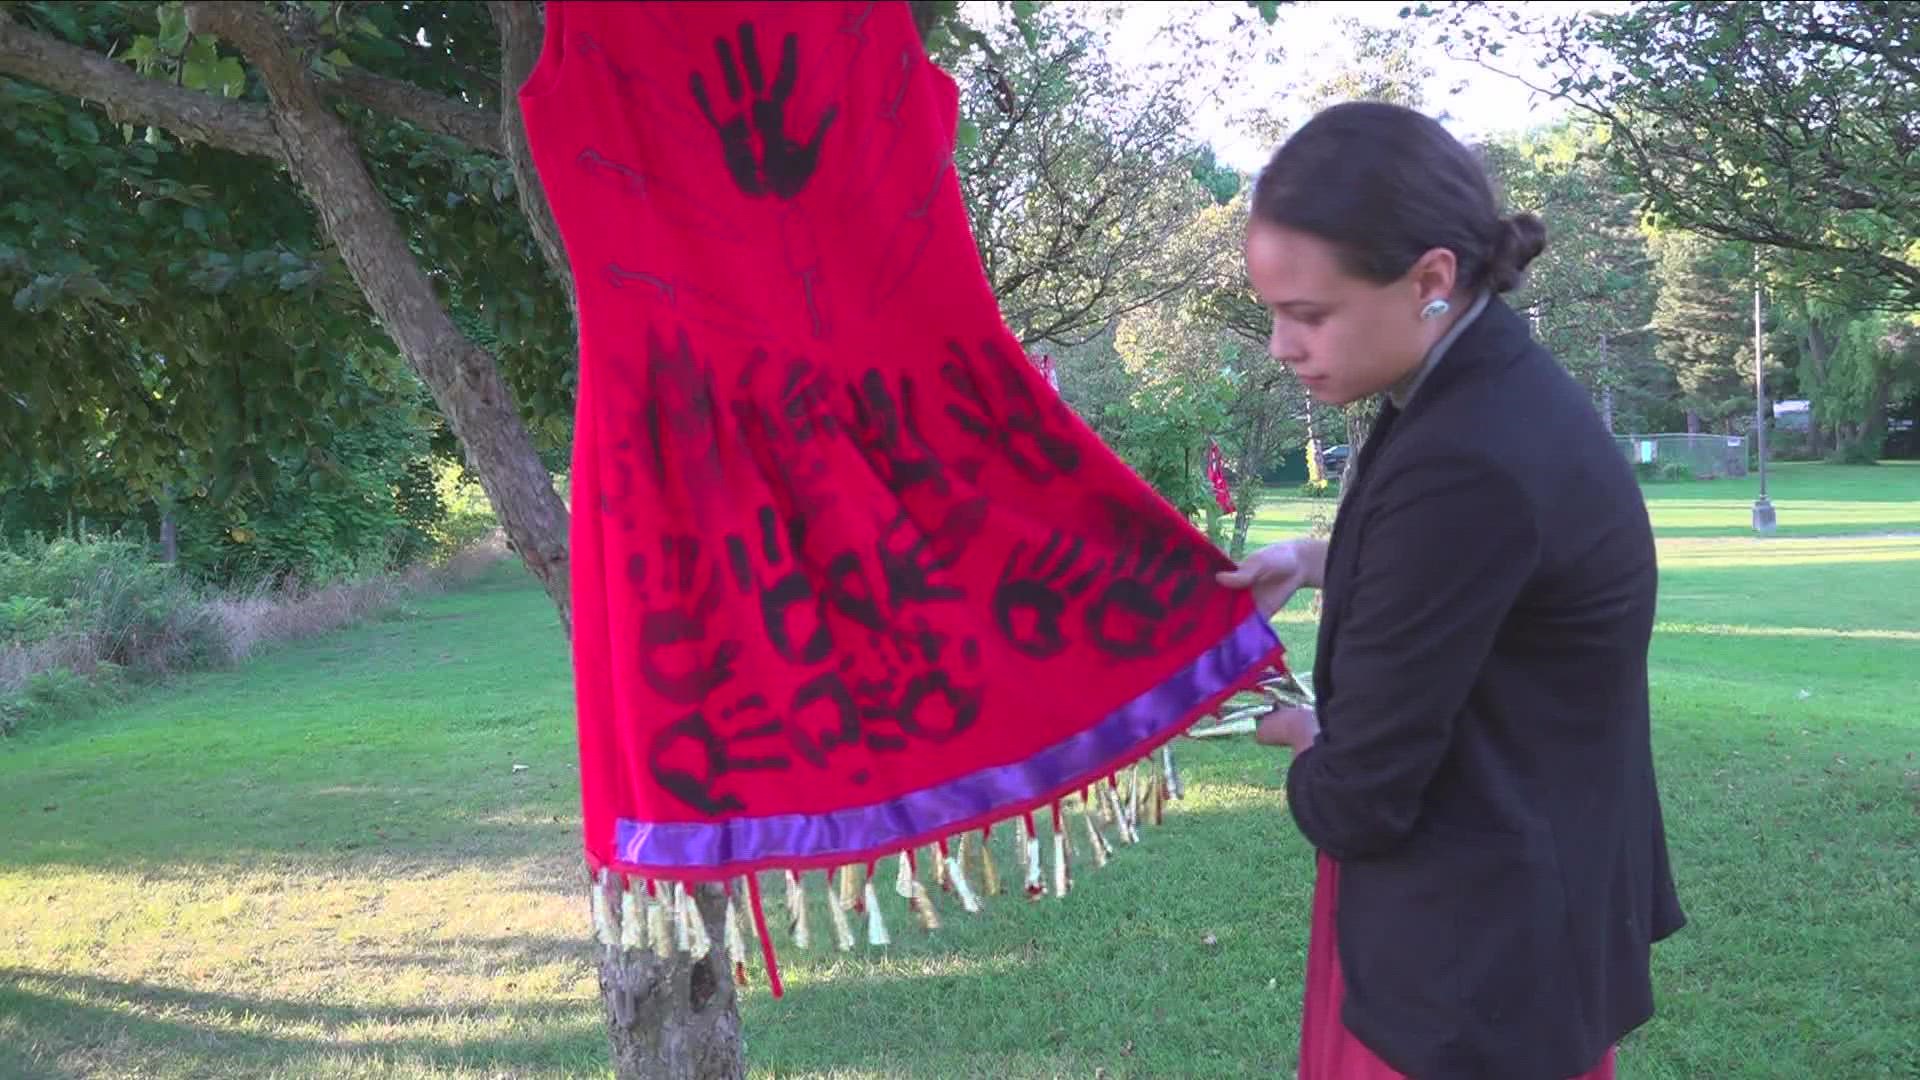 Channel 2 spoke with an indigenous artist who is hoping to raise awareness through her exhibit at Artpark this weekend.